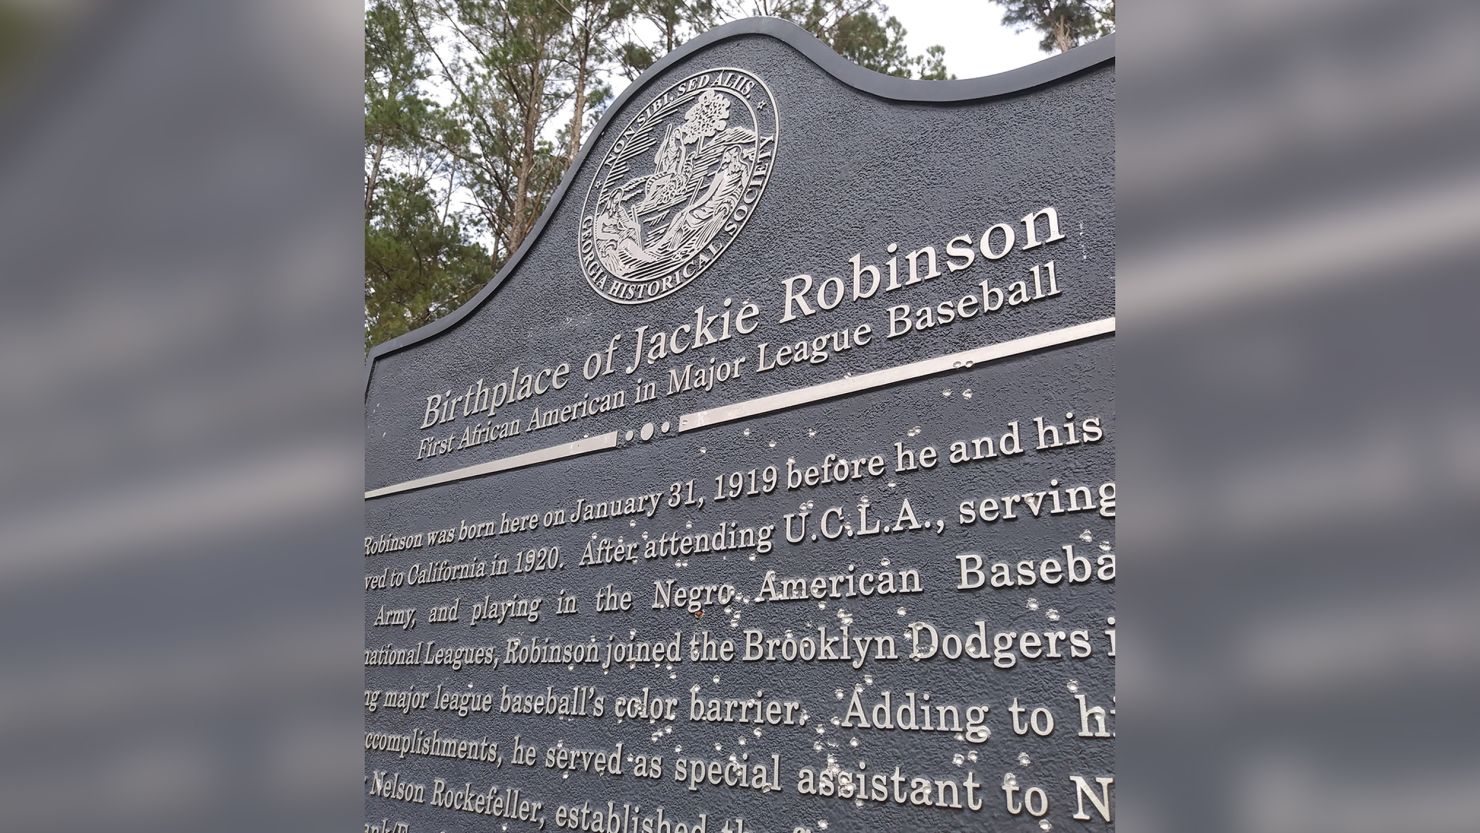 A historical marker that commemorates the birth of Jackie Robinson in rural Georgia was found covered in bullet holes last week, according to the Georgia Historical Society. 